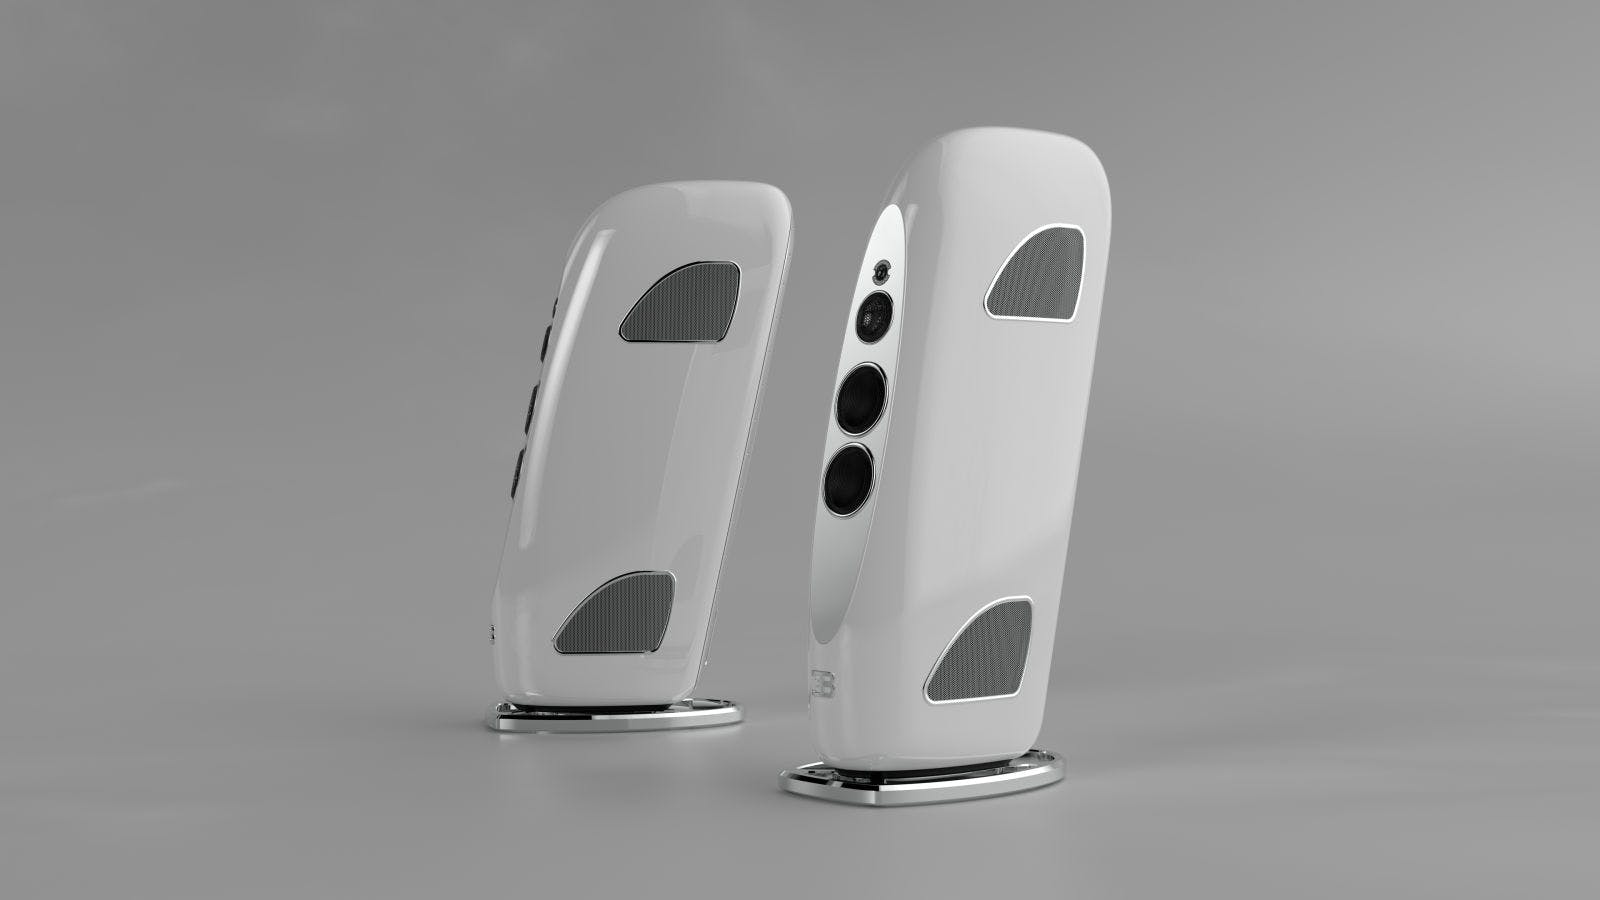 The new Bugatti sound: the Royale “Edition Blanc”, limited to 15 pairs of speakers.